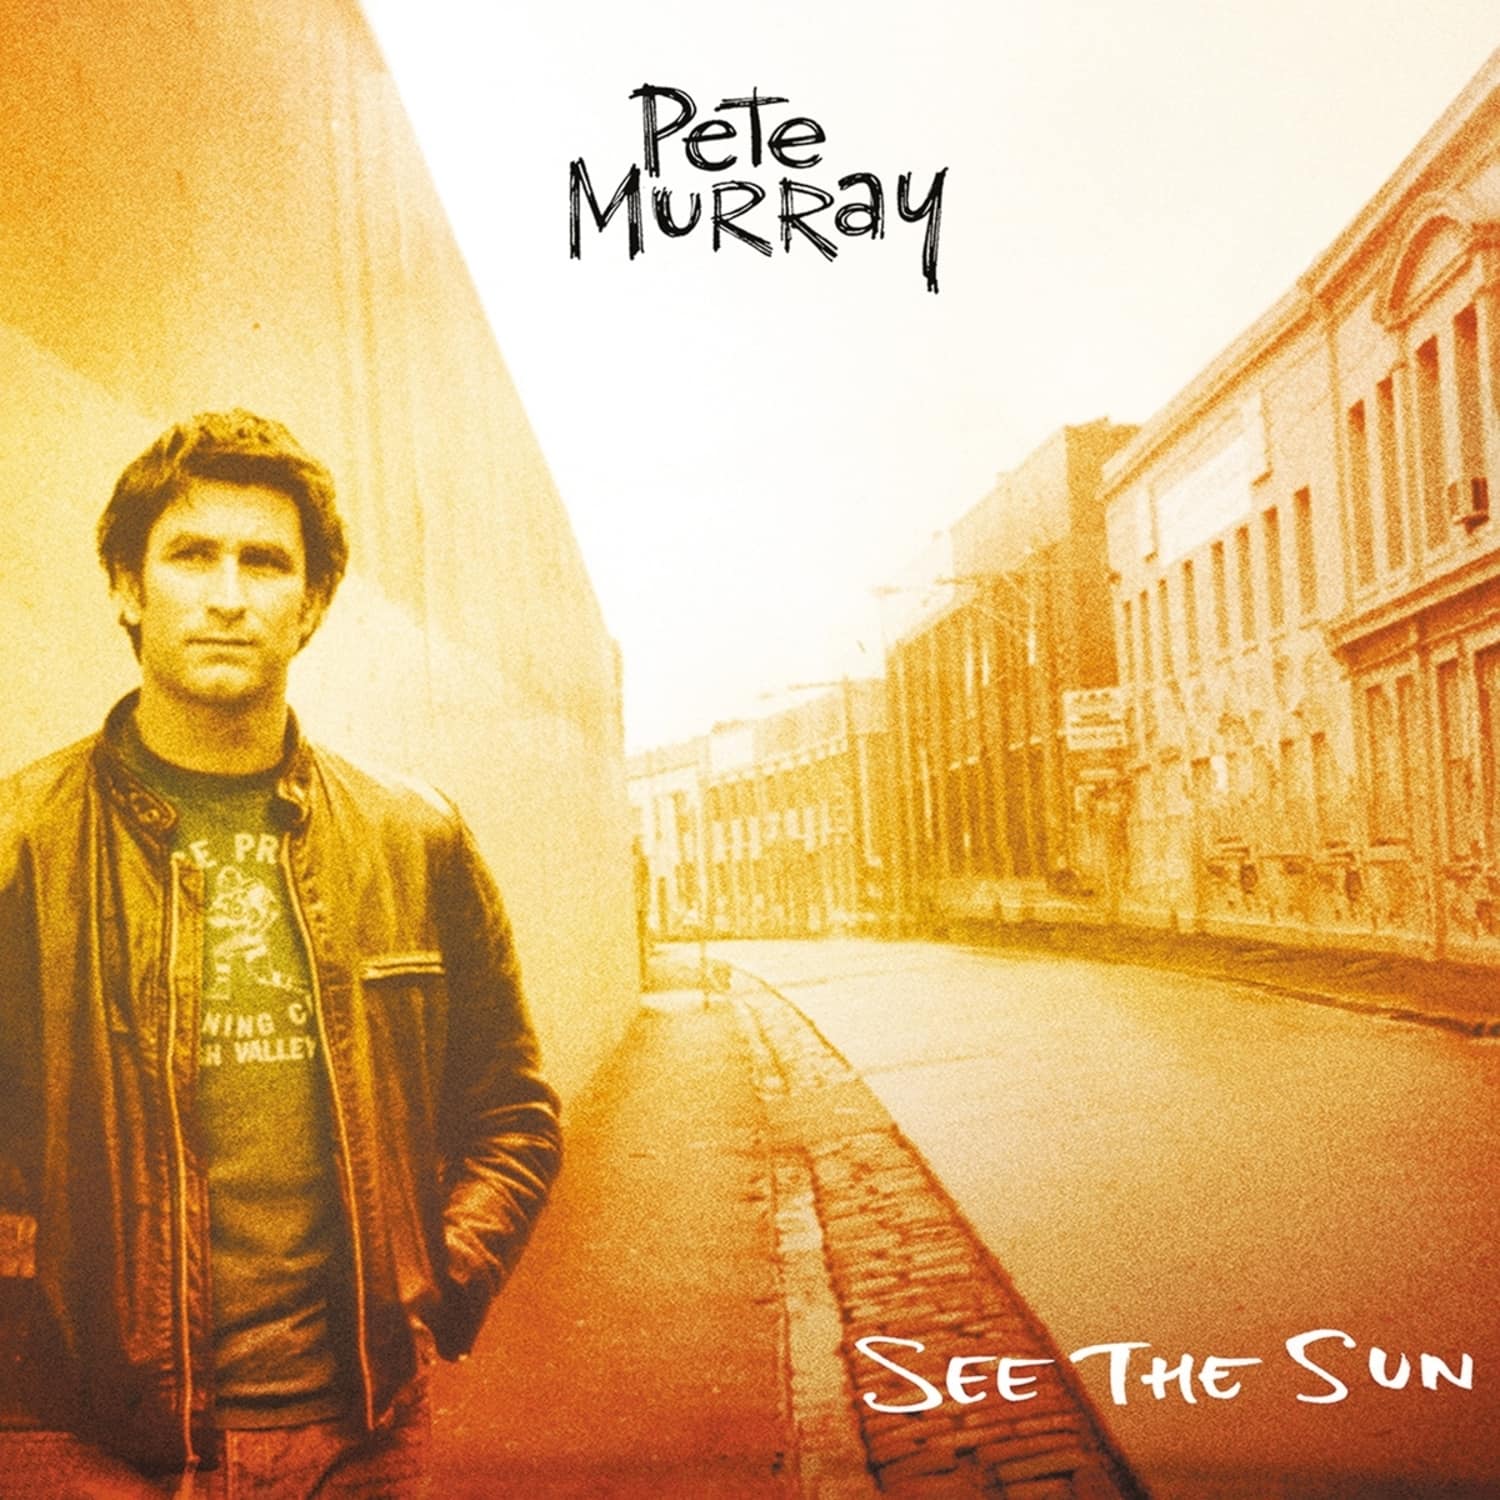  Pete Murray - SEE THE SUN 